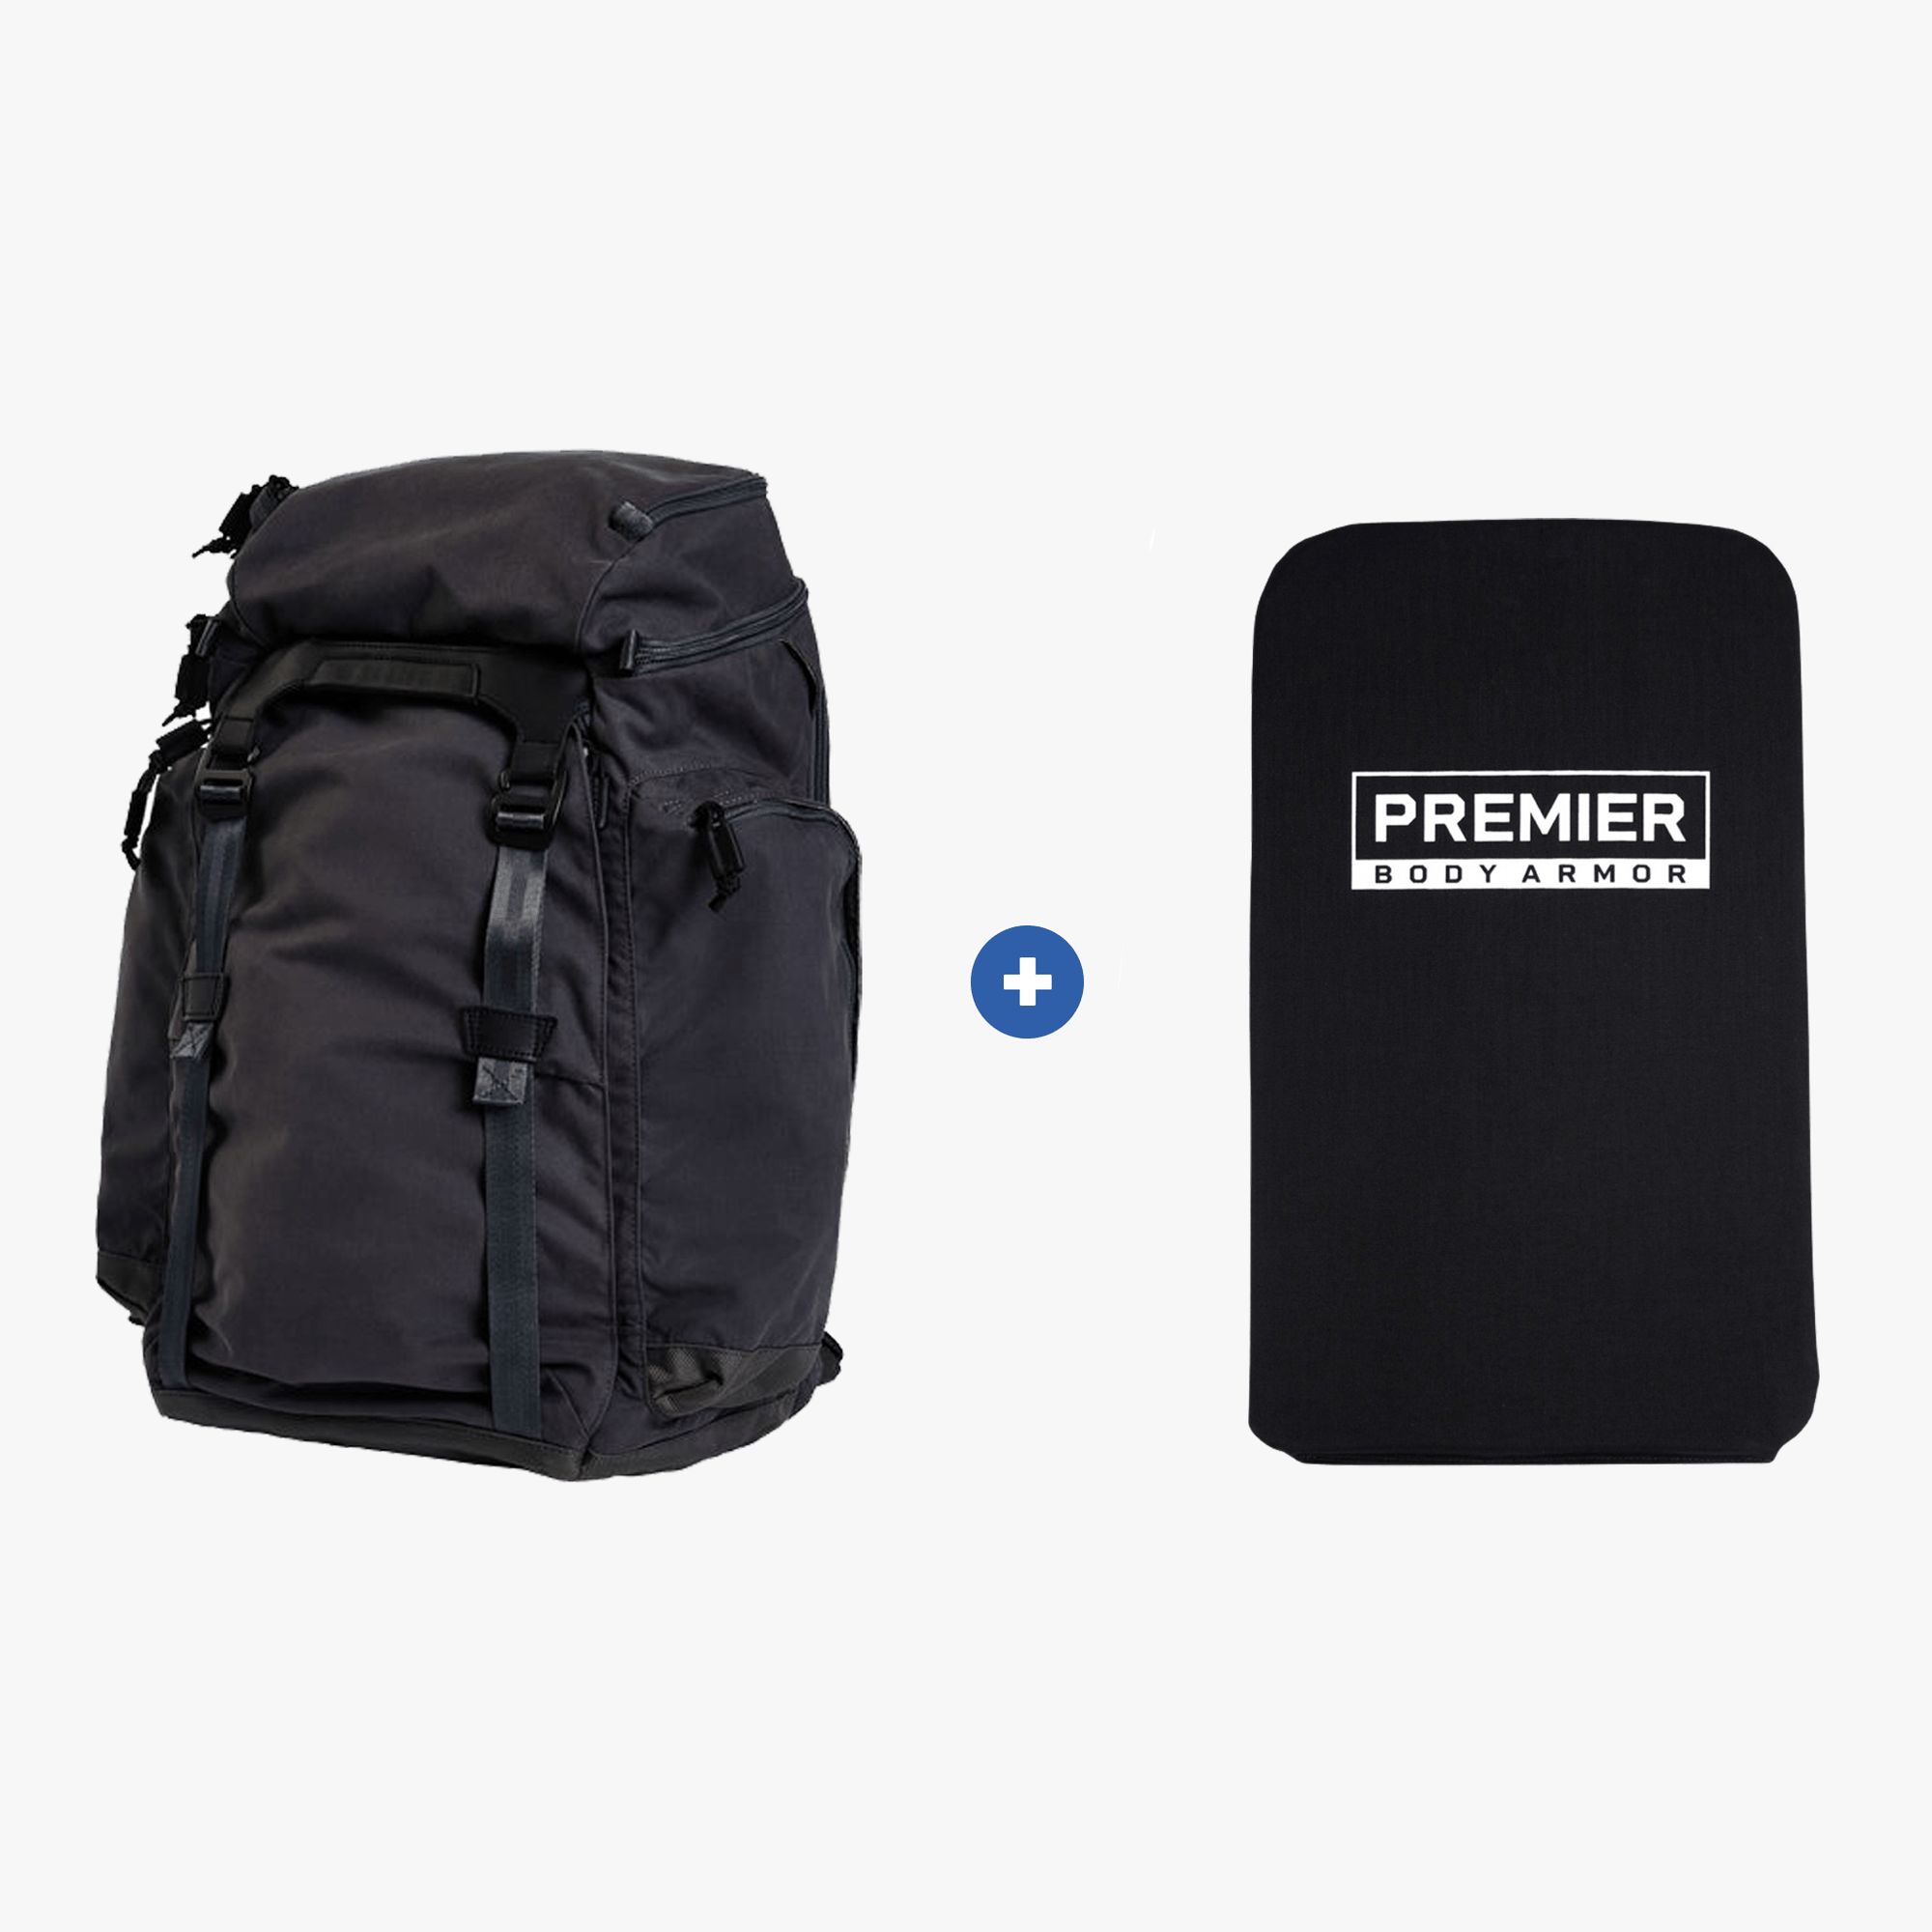 Have the best bulletproof backpack utilizing the Vertx Ardennes Holiday pack with Premier's level 3a soft body armor inserts. 